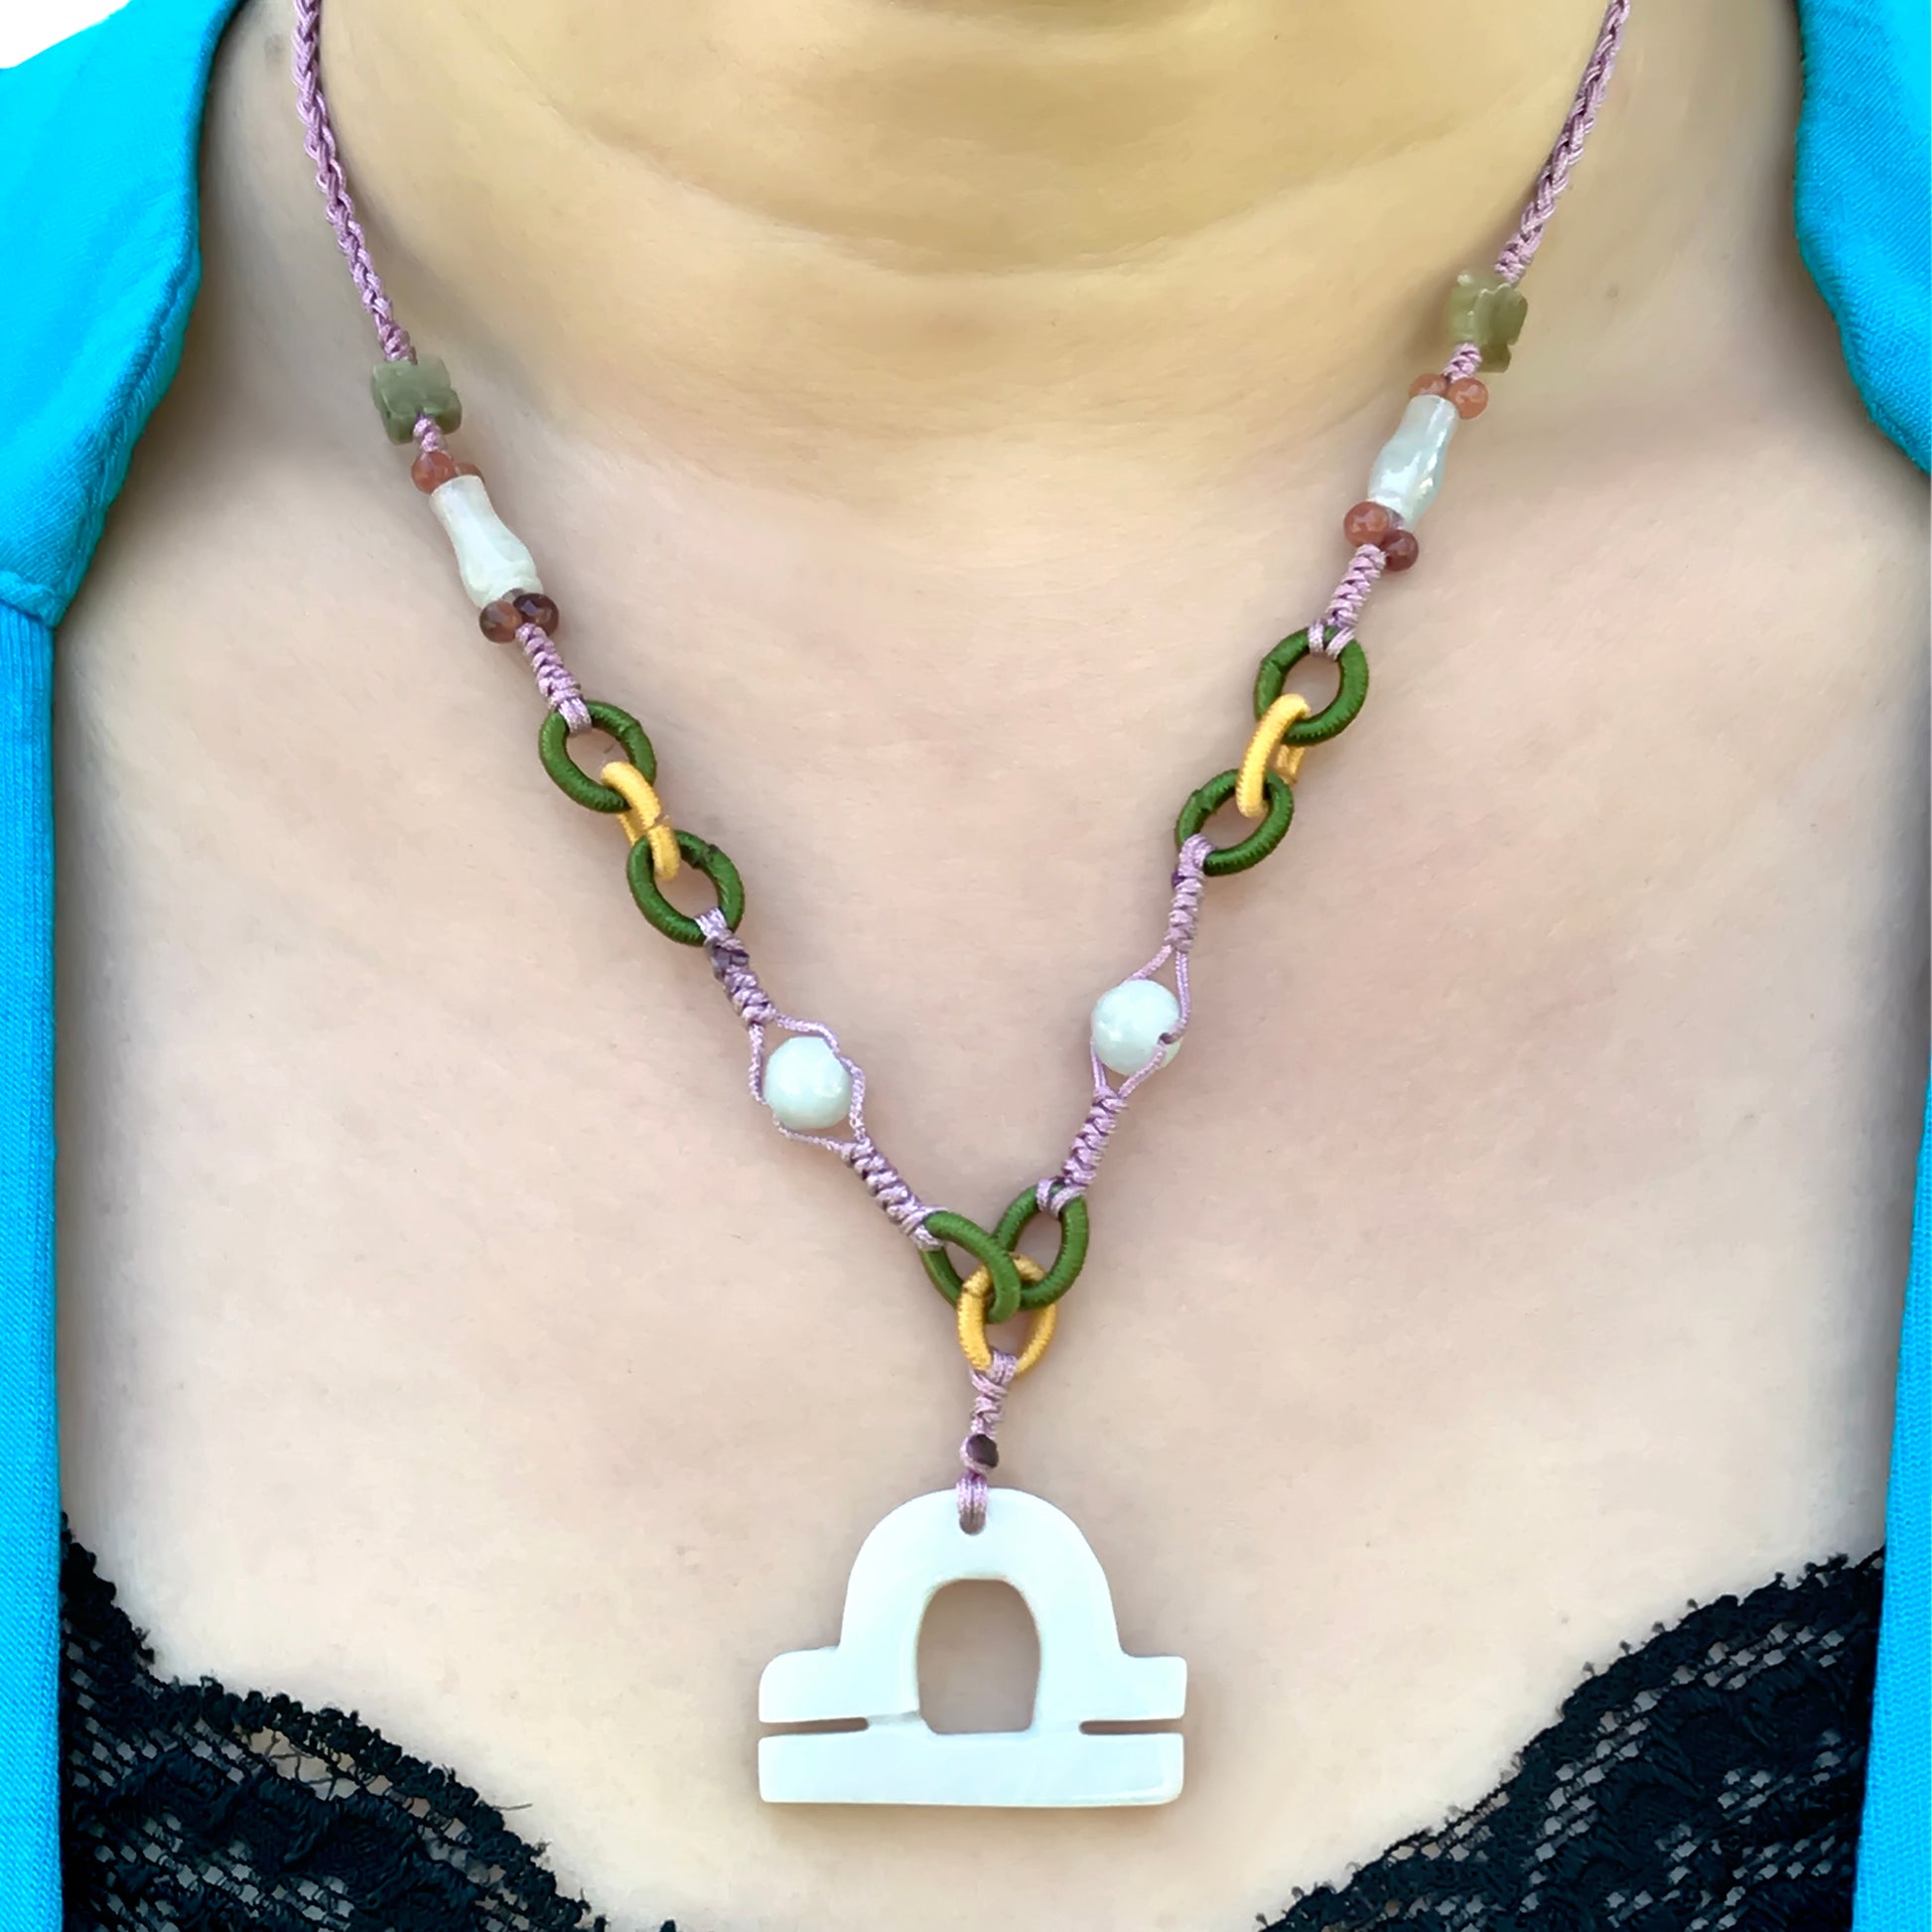 Get the Perfect Get the Perfect Gift for the Libra in Your Life with Jade Necklace made with Lavender Cord